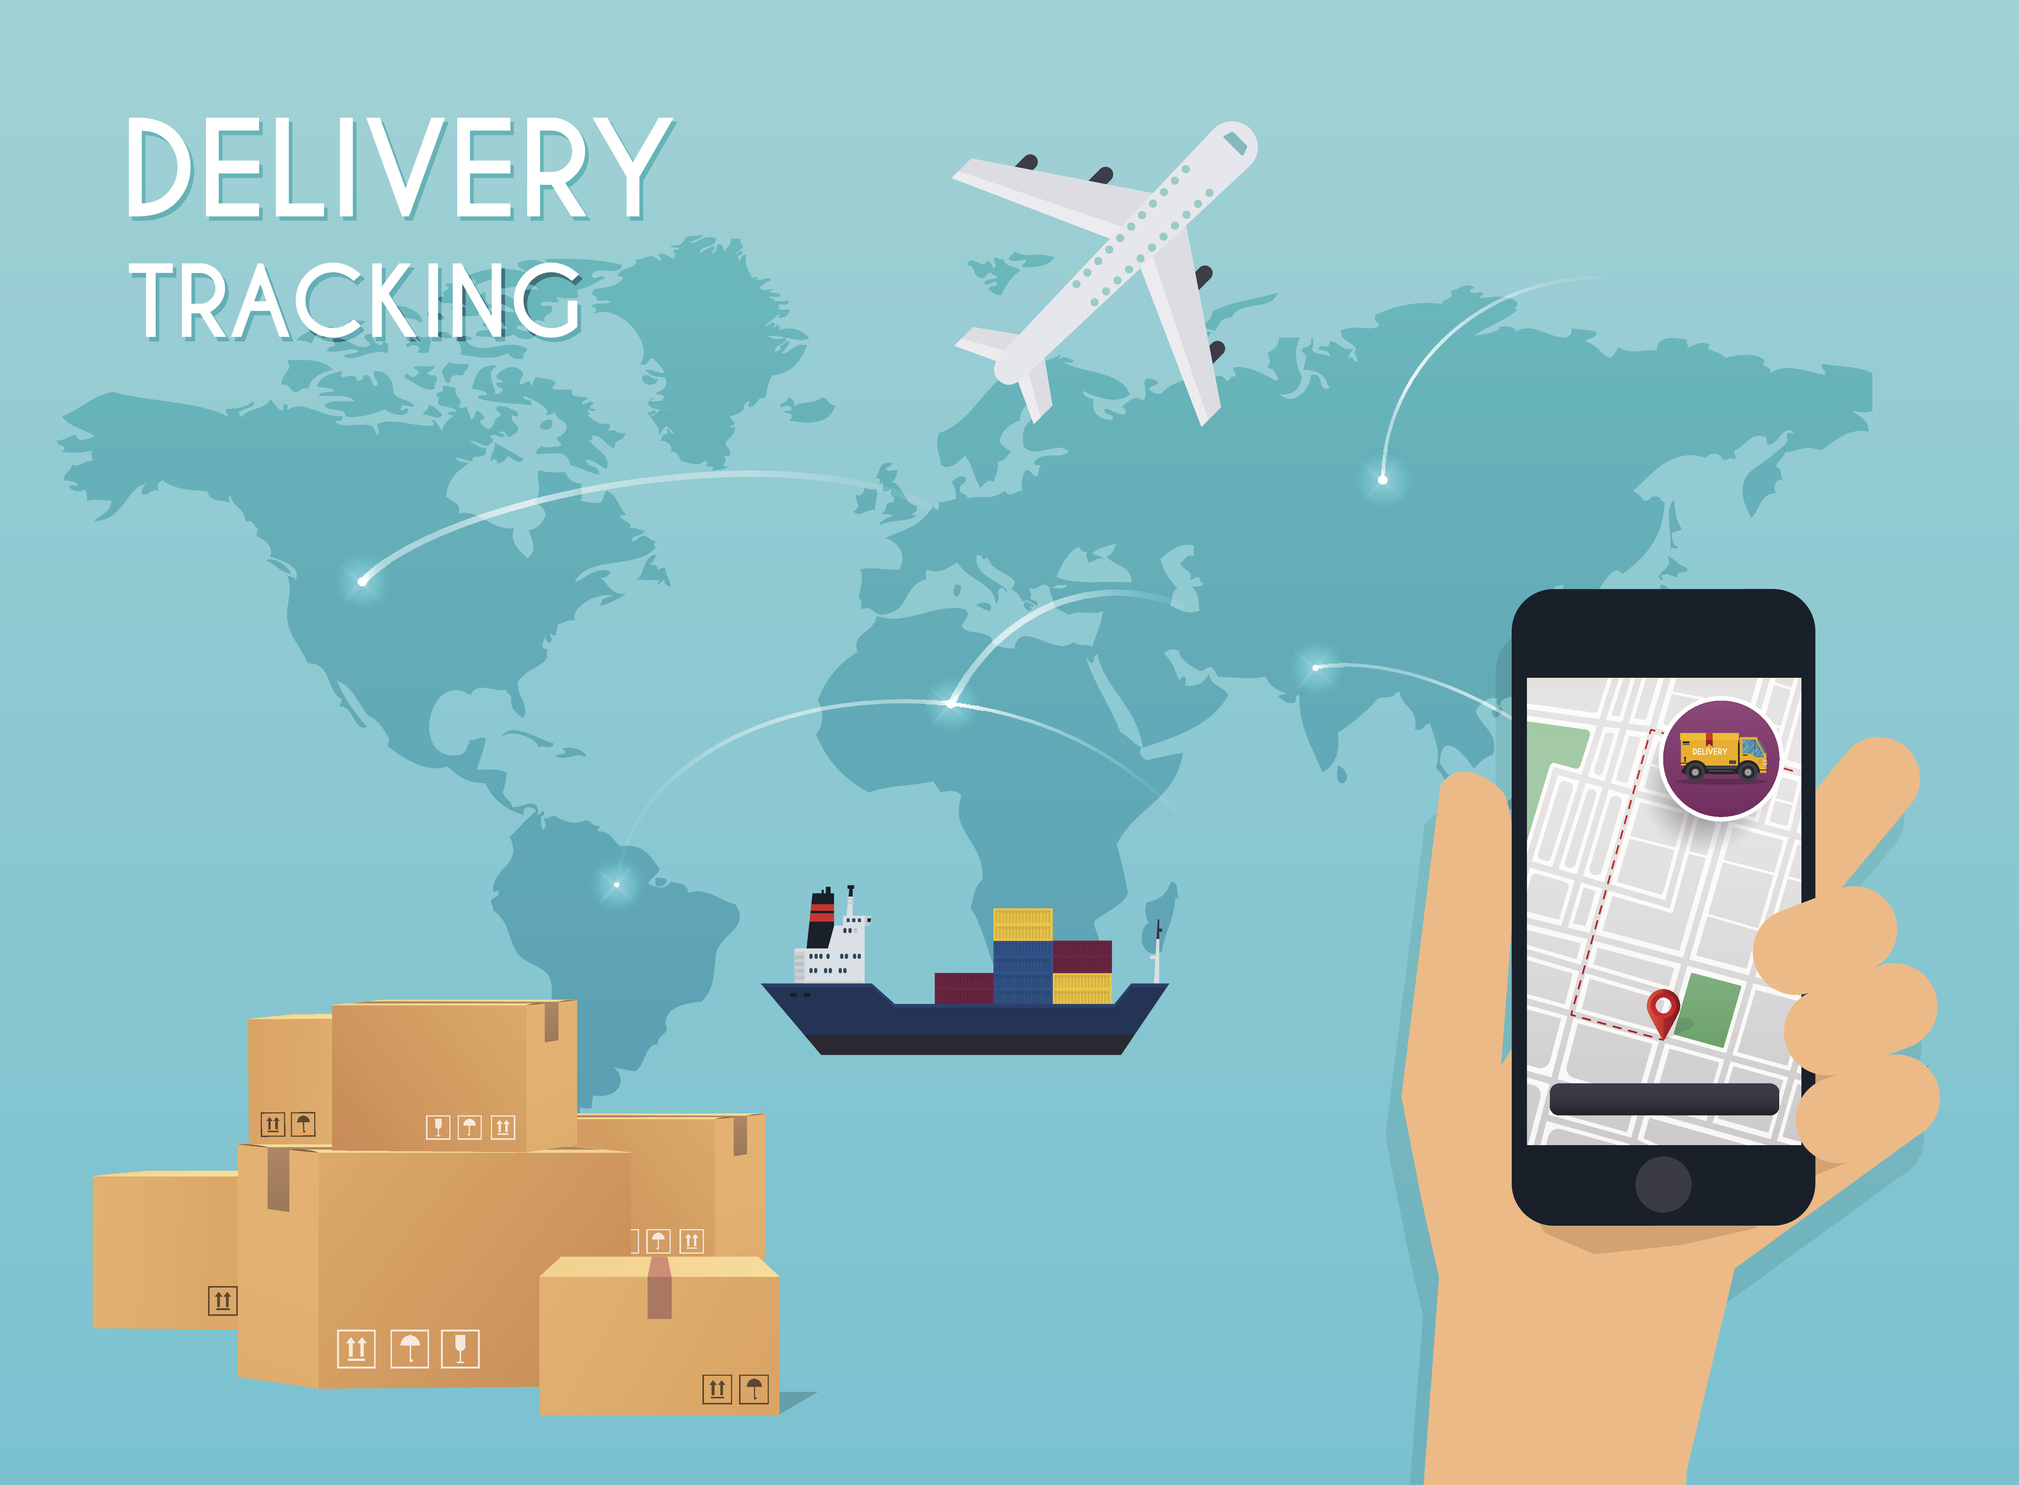 Tracking your business transactions should be as easy as tracking packages online